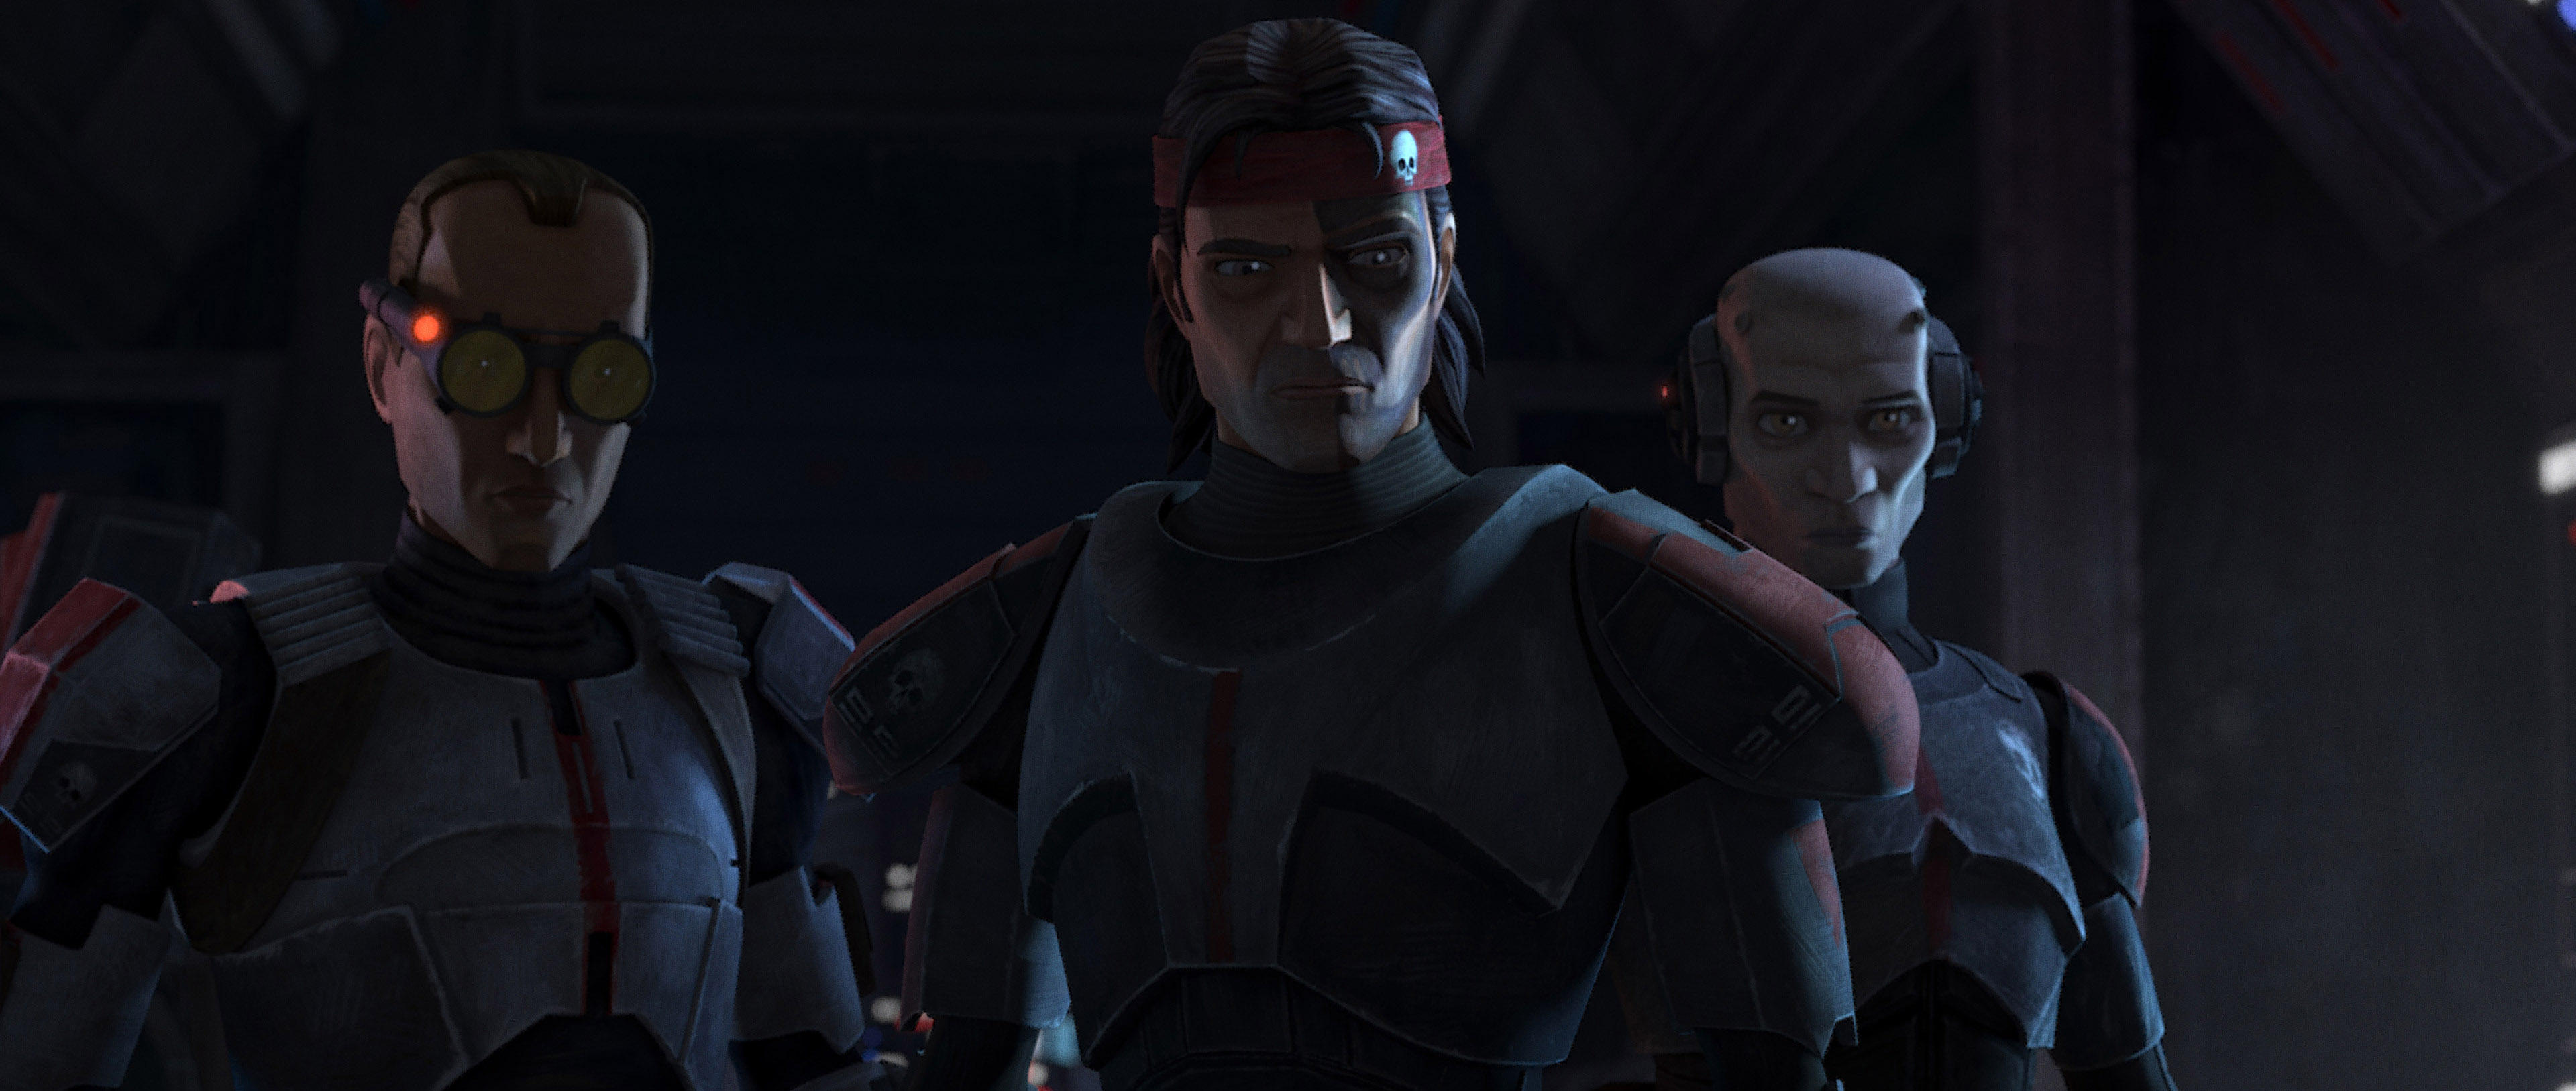 Star Wars: The Bad Batch: Episode 4, Cornered, Tech, Hunter, and Echo, Clone Force 99. 3840x1630 Dual Screen Background.